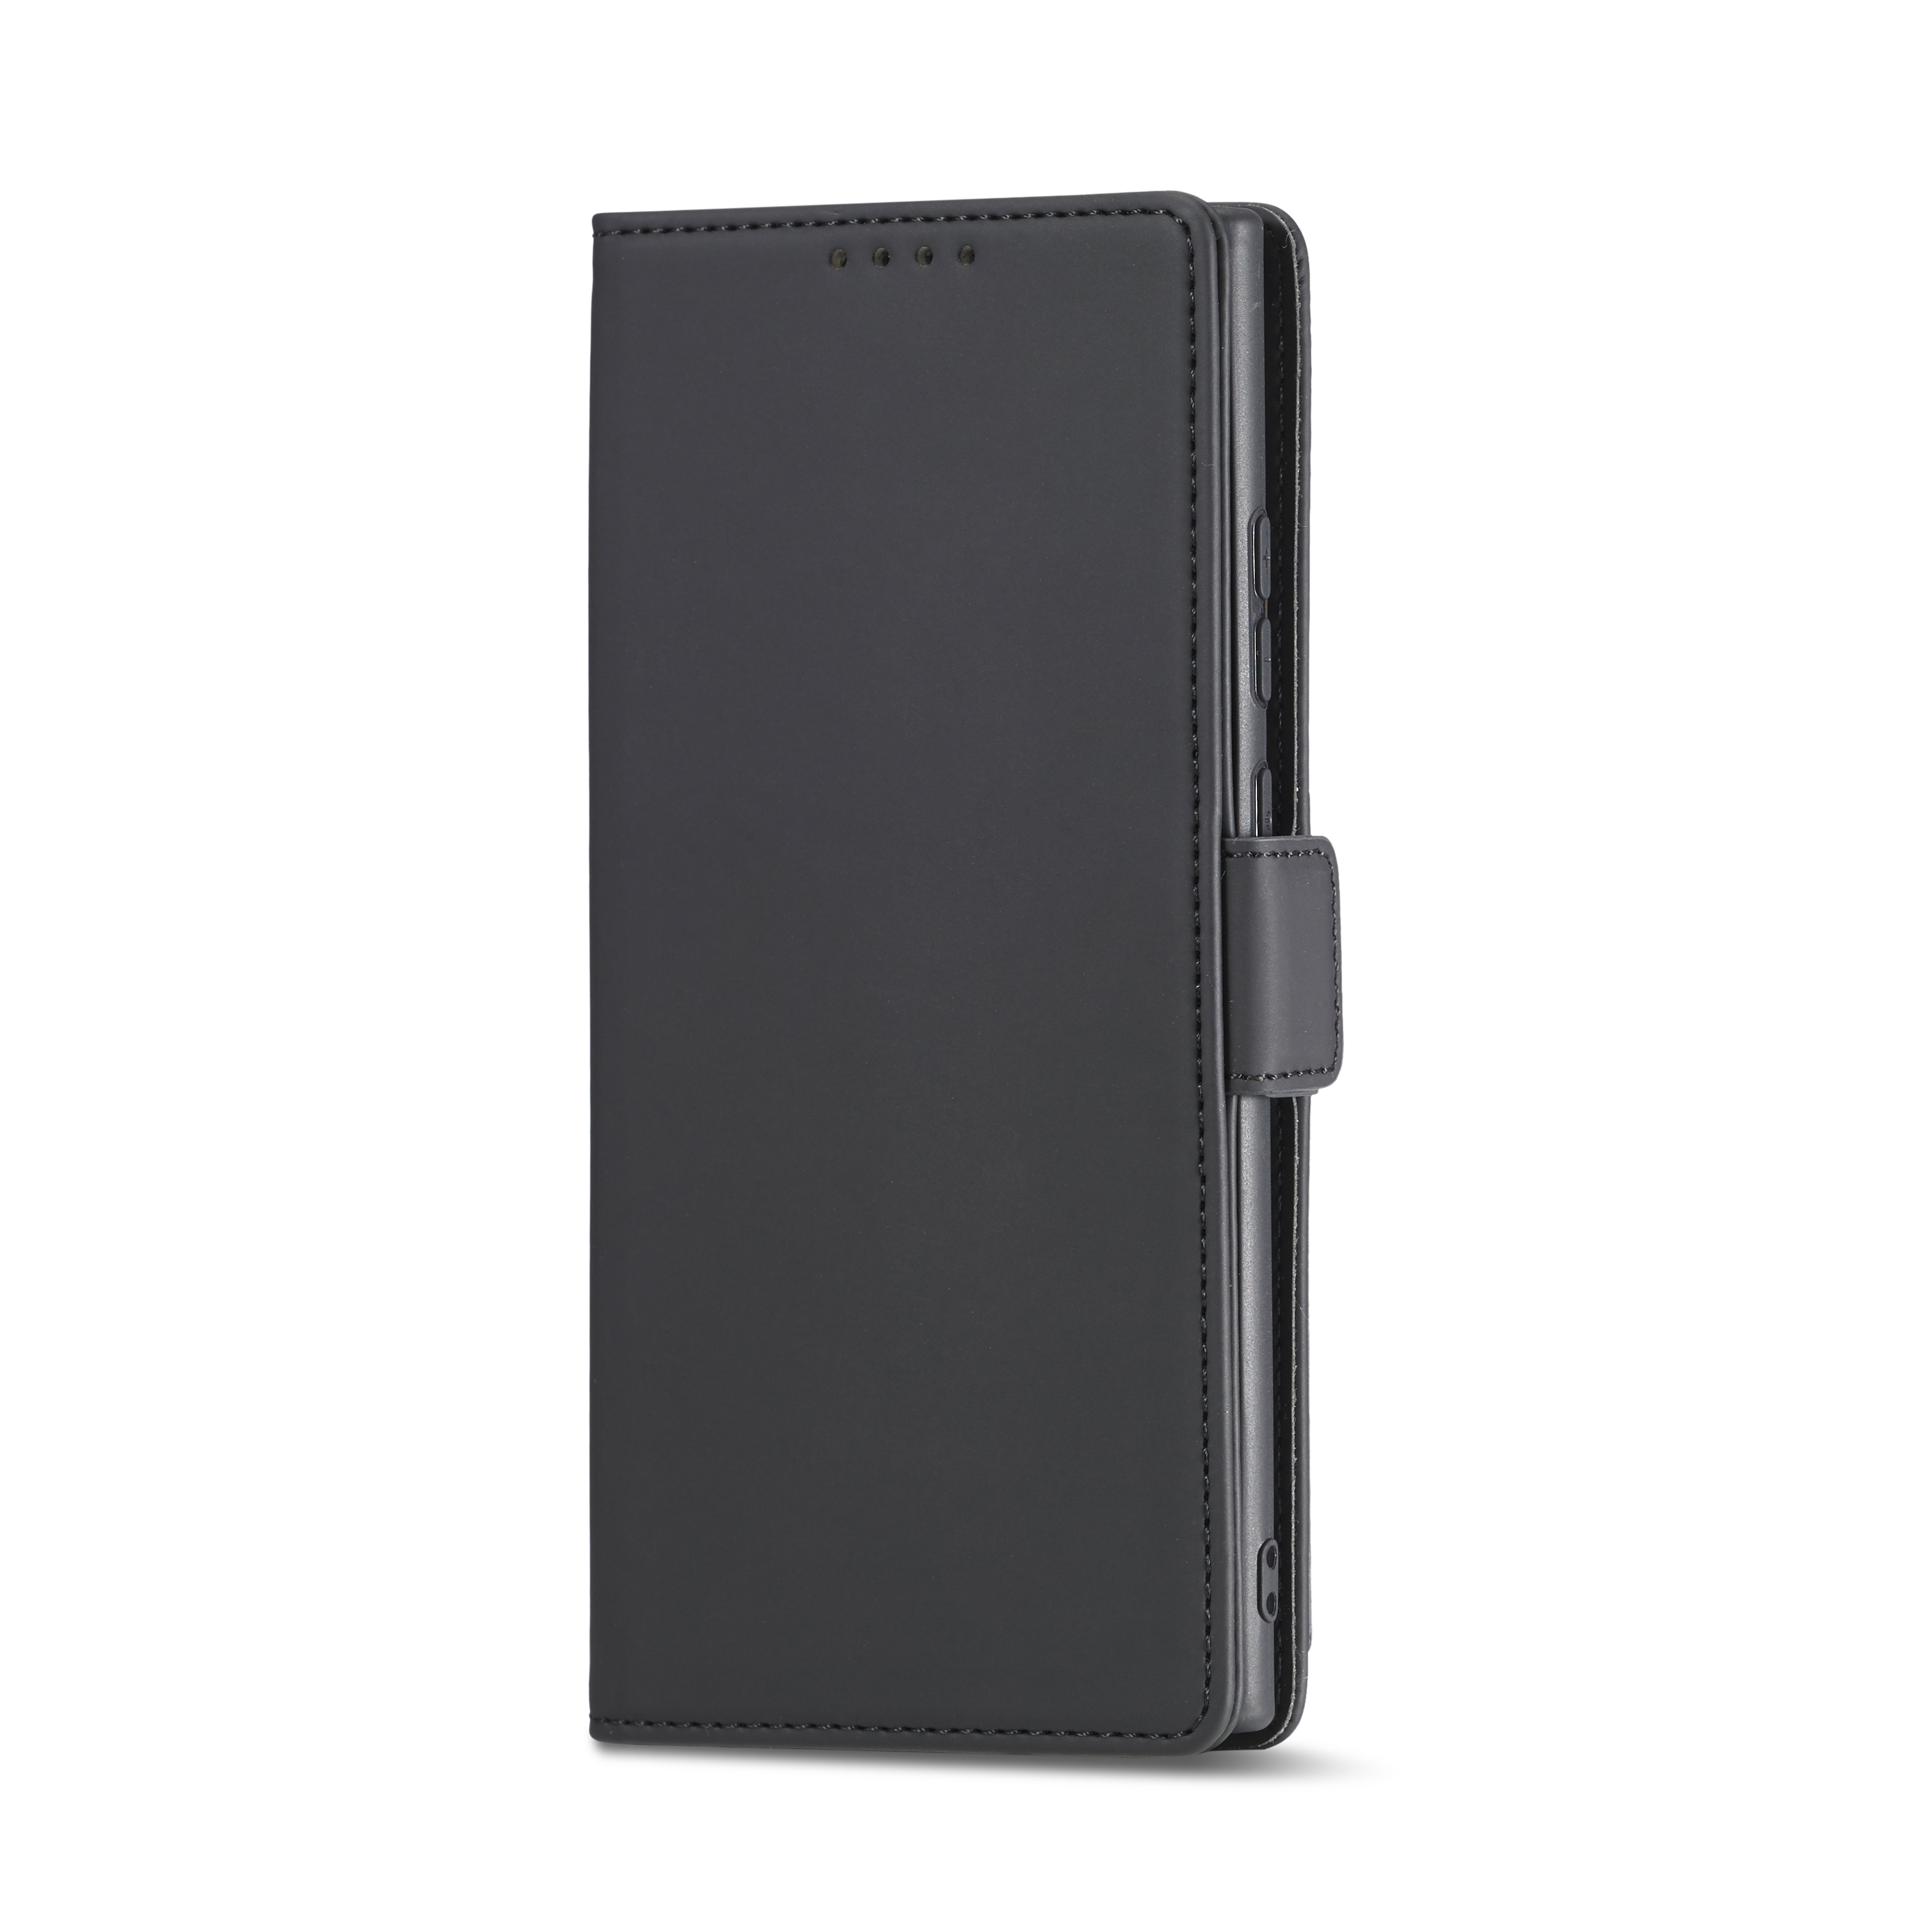 Bakeey-for-Samsung-Galaxy-Note-20-Case-Business-Flip-Magnetic-with-Multi-Card-Slots-Wallet-Shockproo-1763271-4